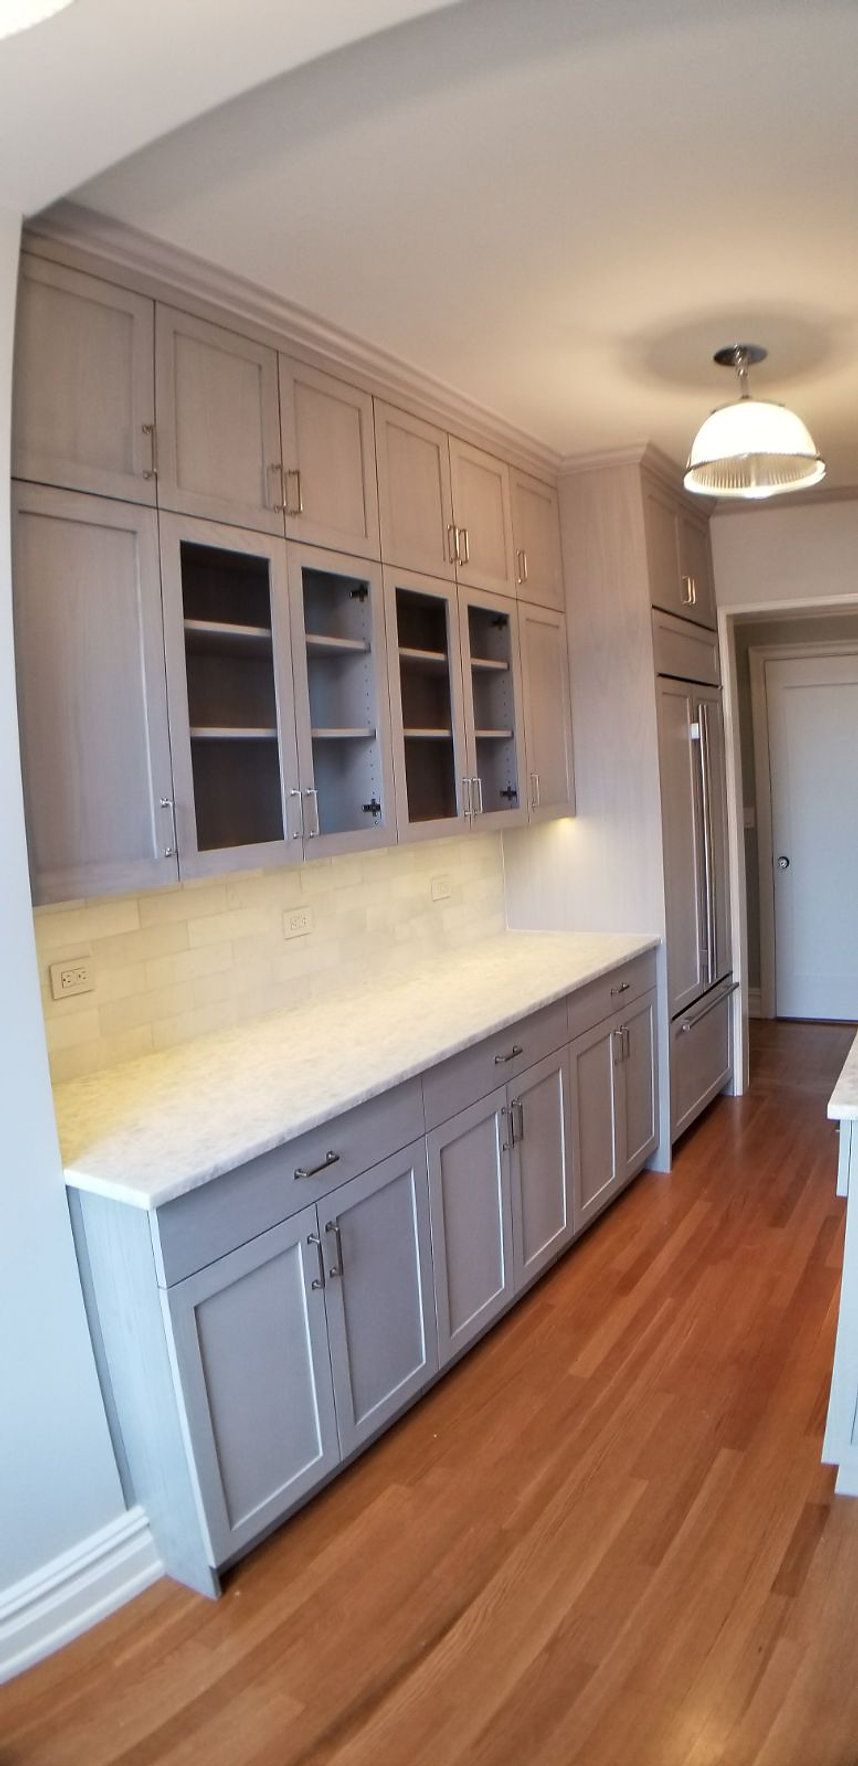 A kitchen with gray cabinets, white counter tops, and hardwood floors.